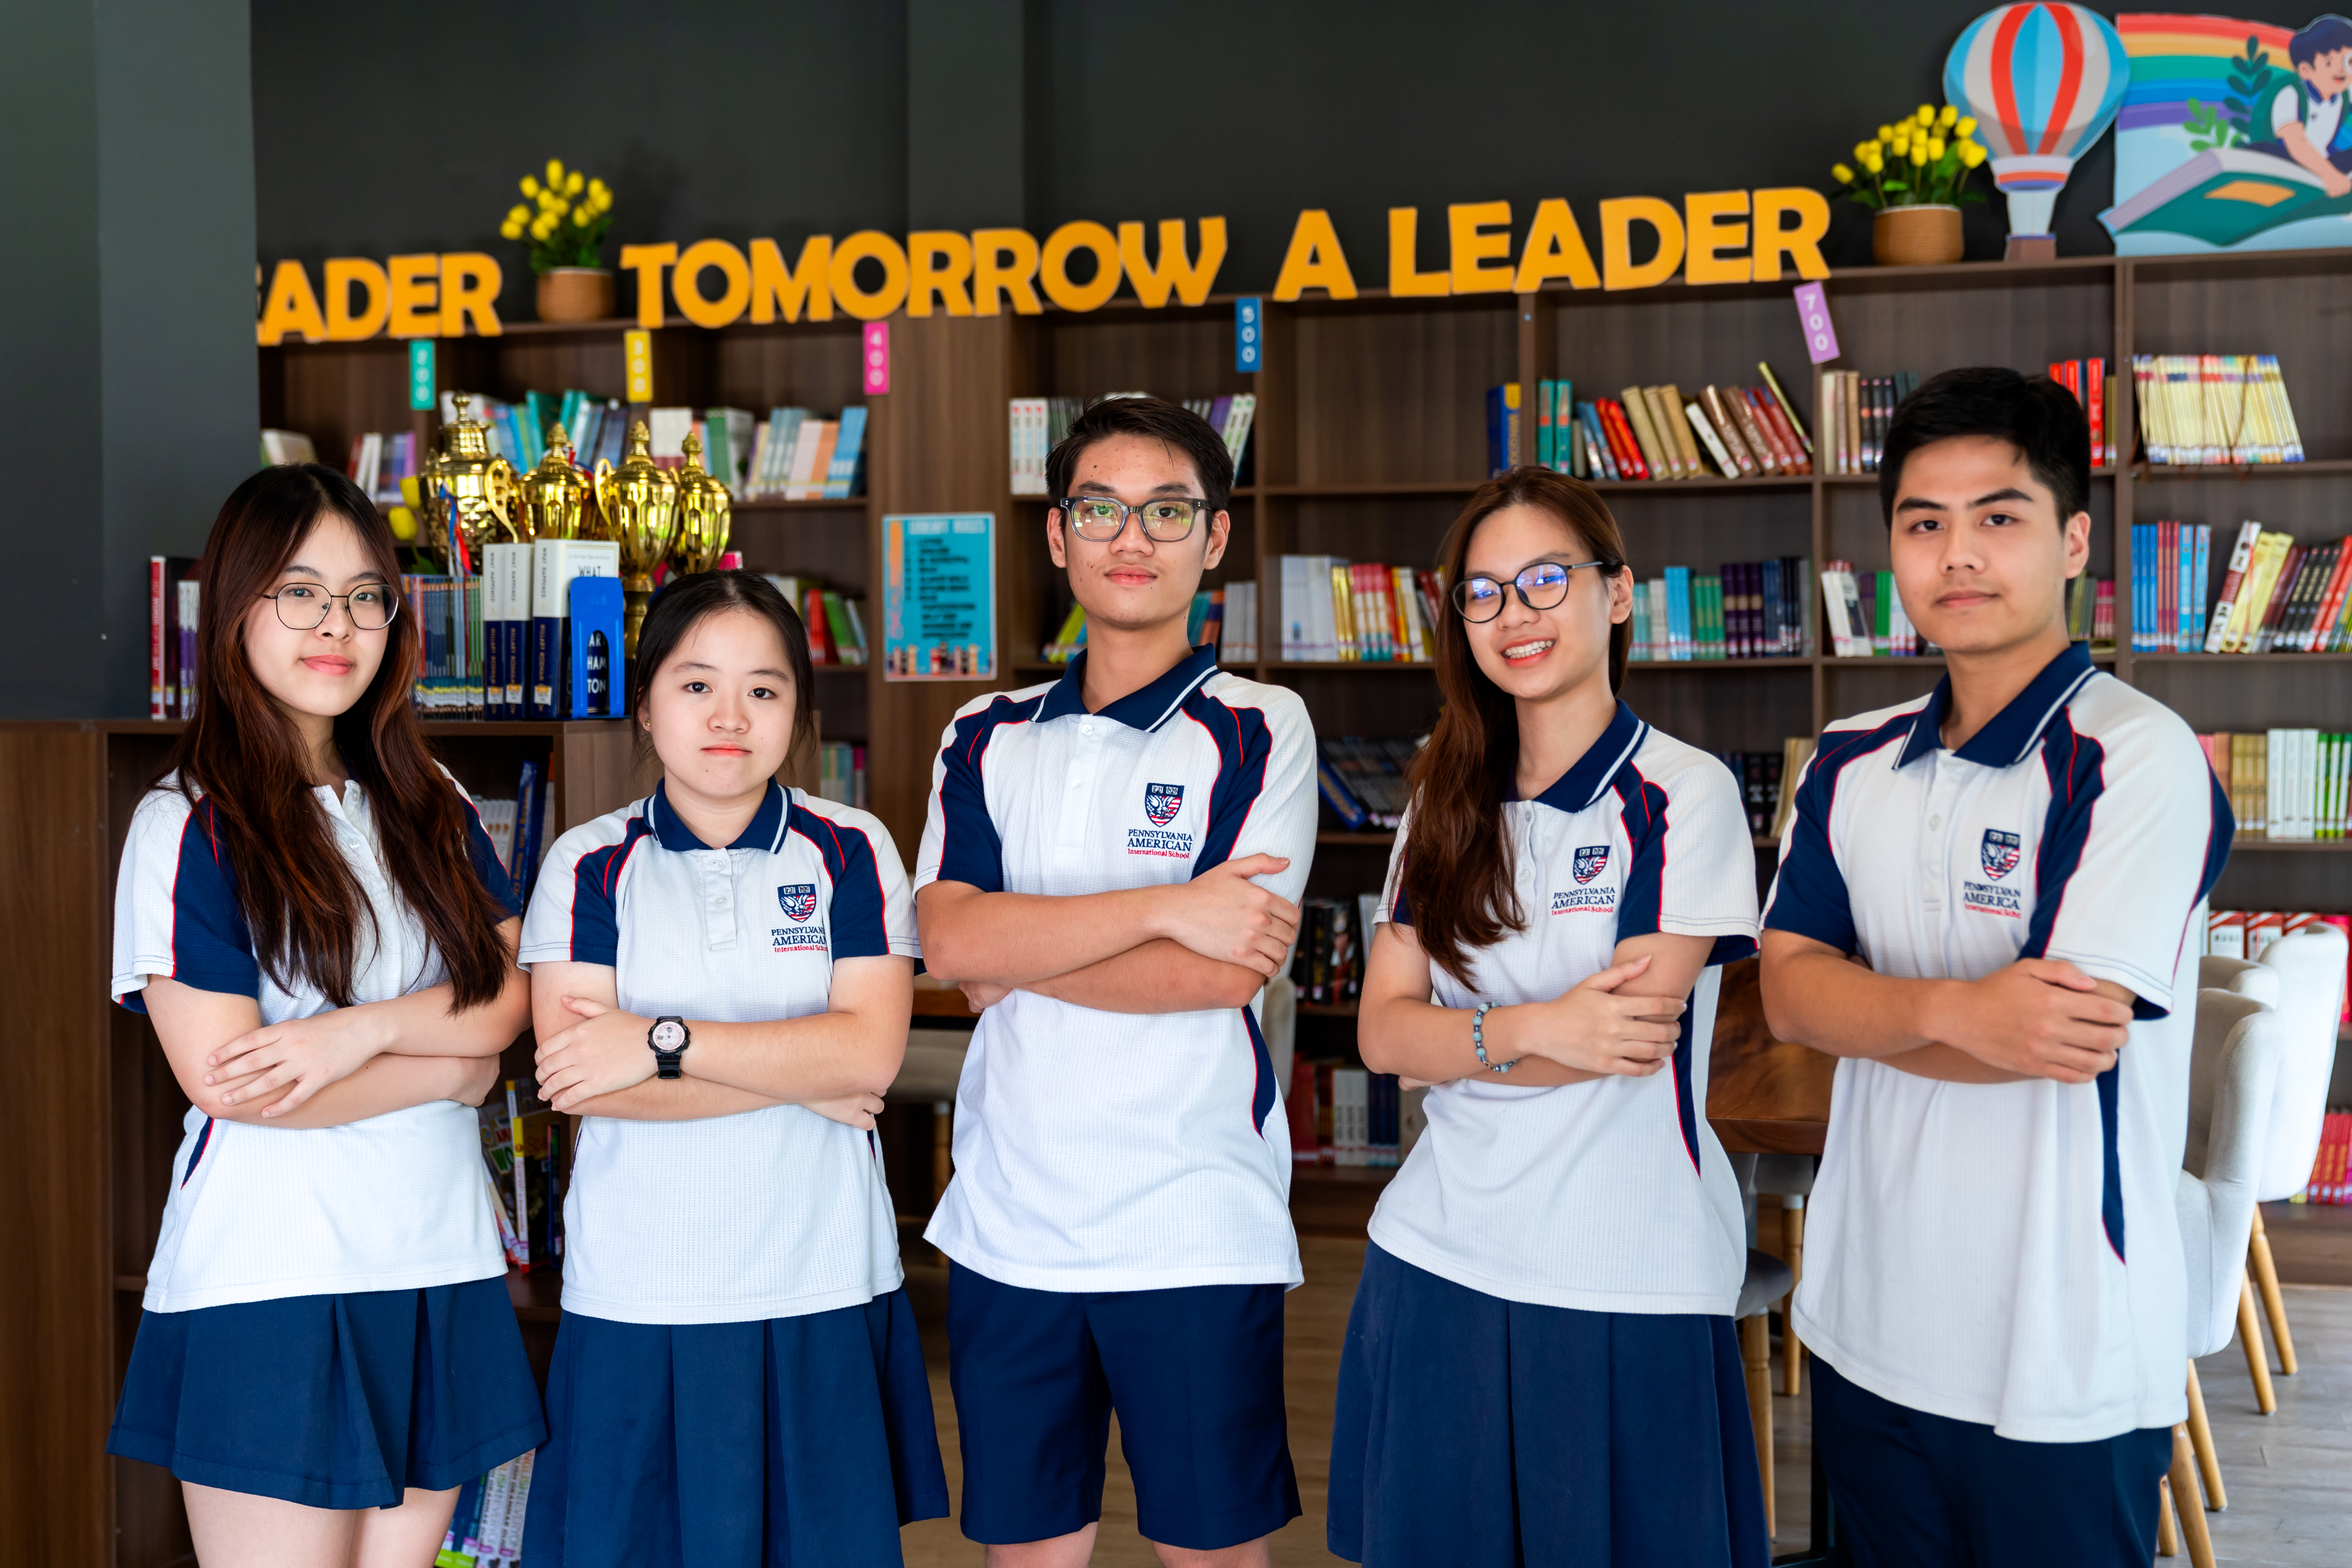 student-council-members-demonstrate-leadership-to-engage-the-pennschool-community